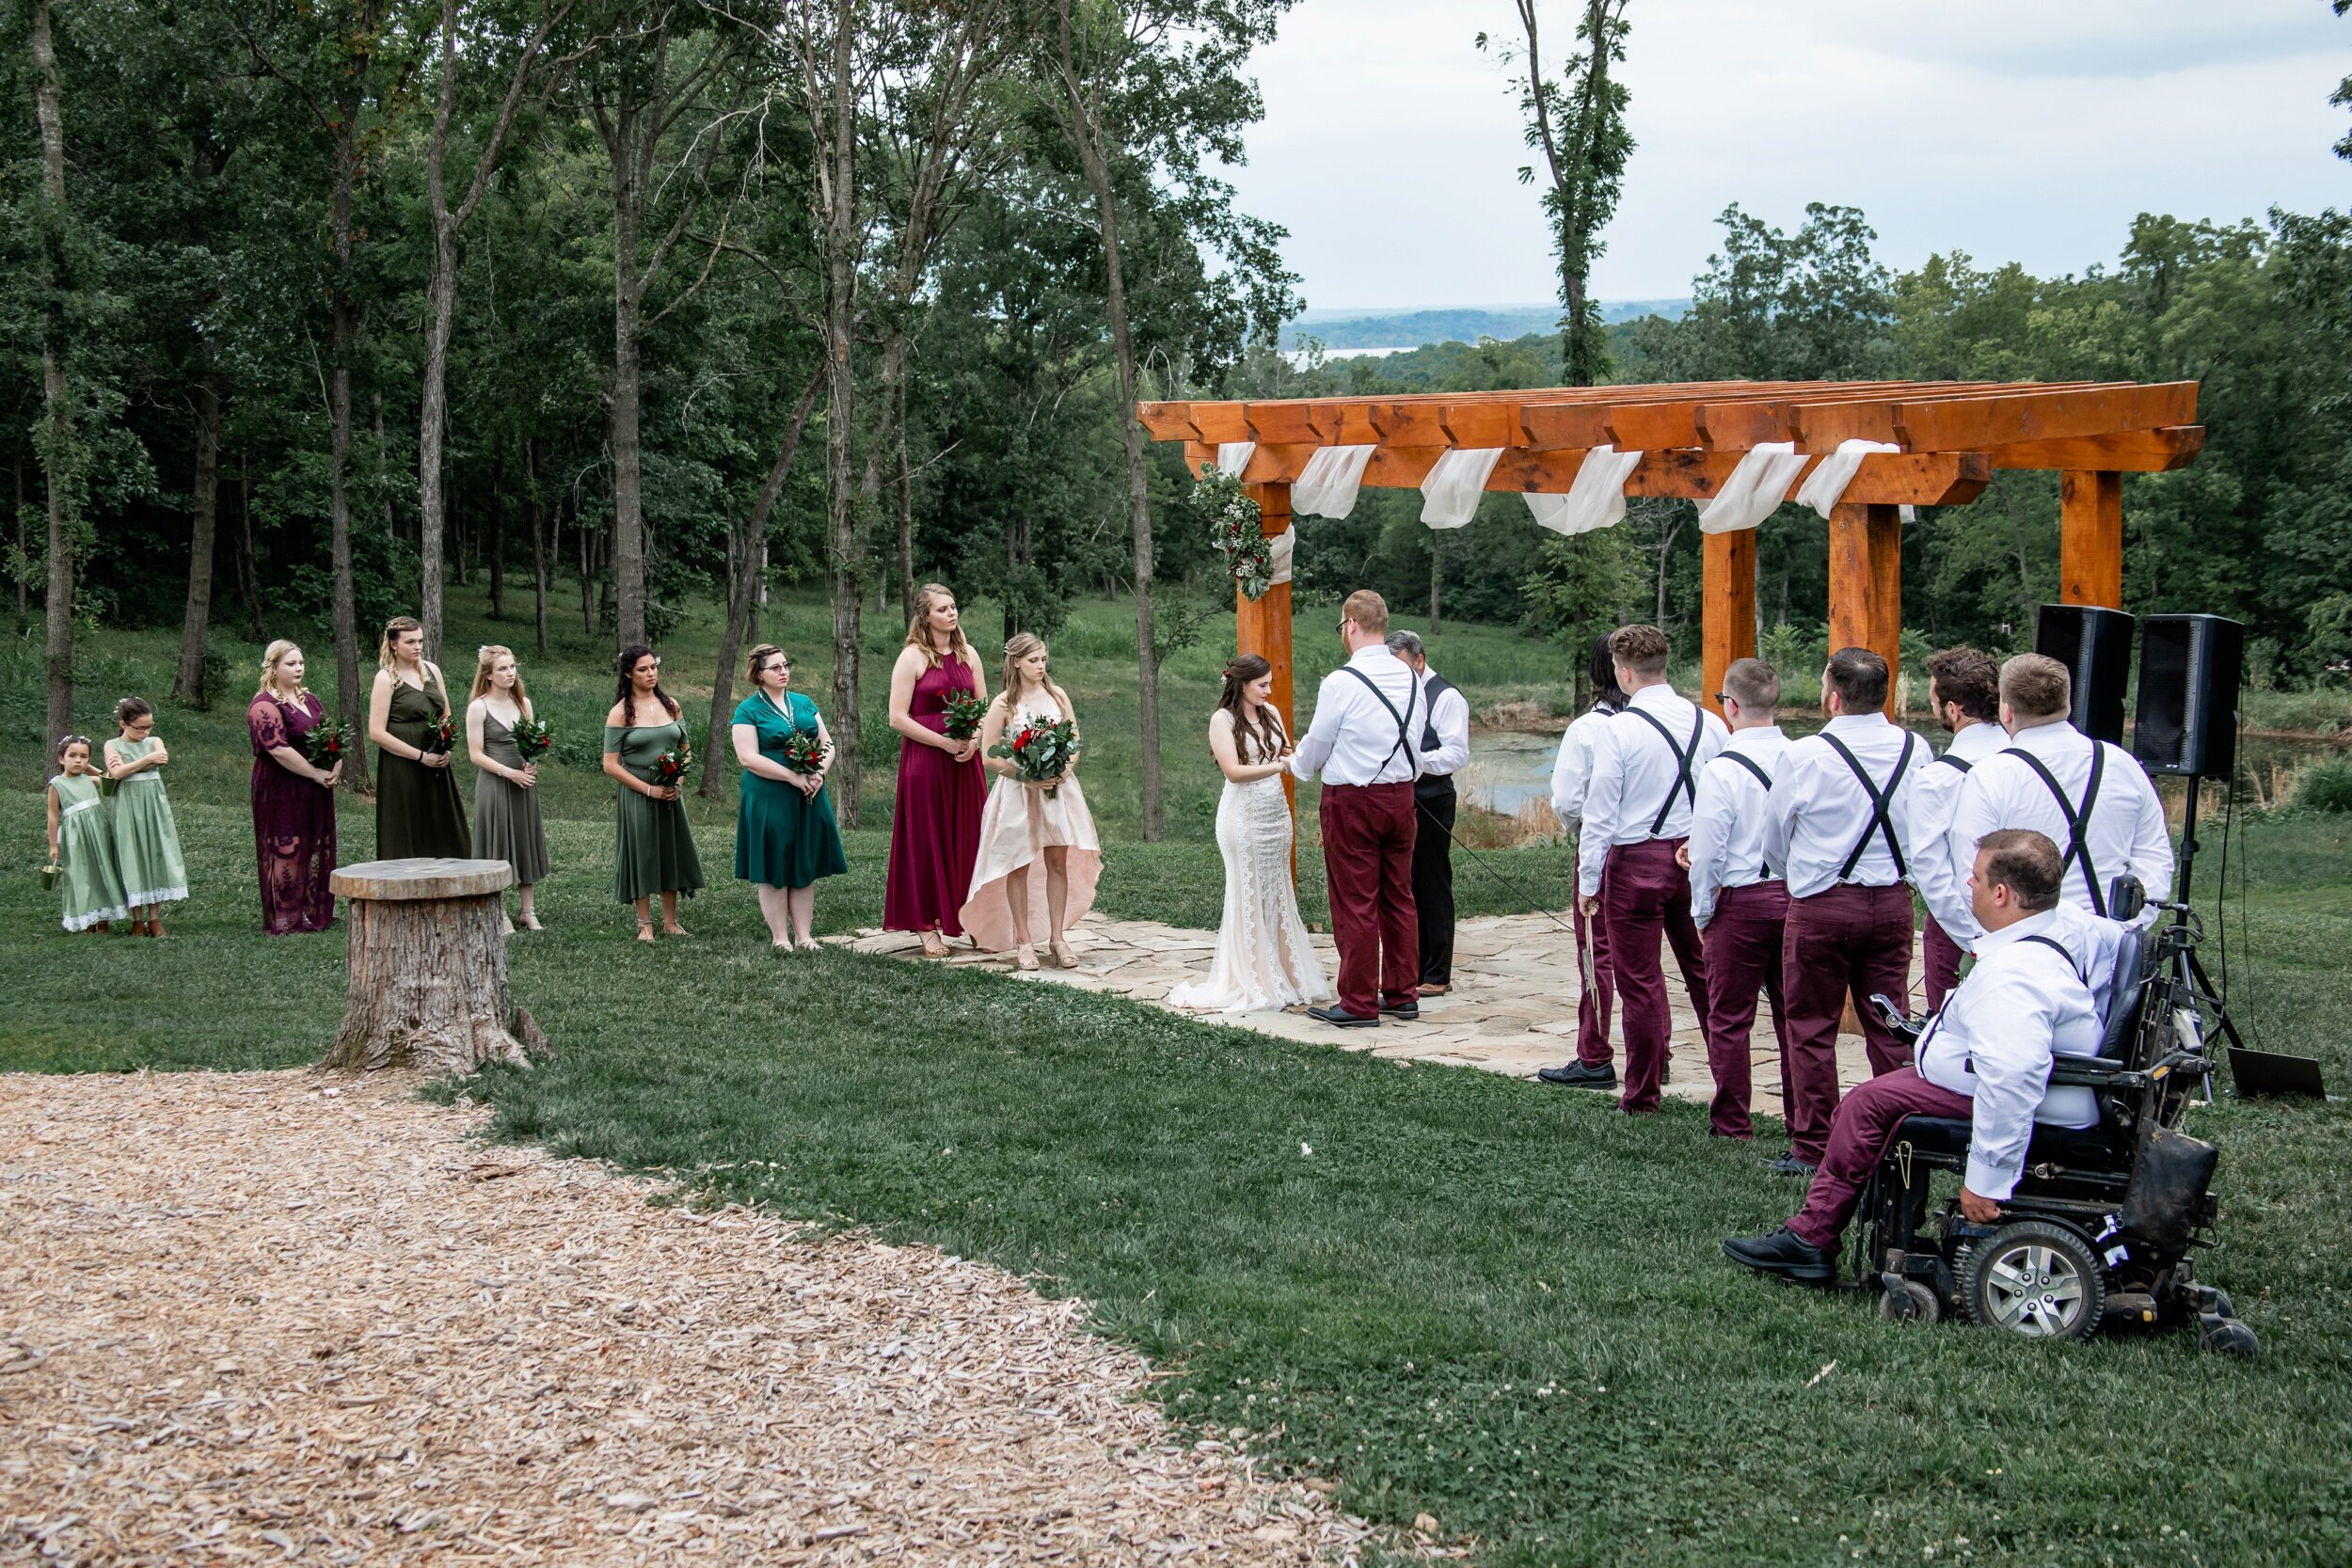 Summer Outdoor Wedding Photography at Stockton Lake by Merry Ohler - 21